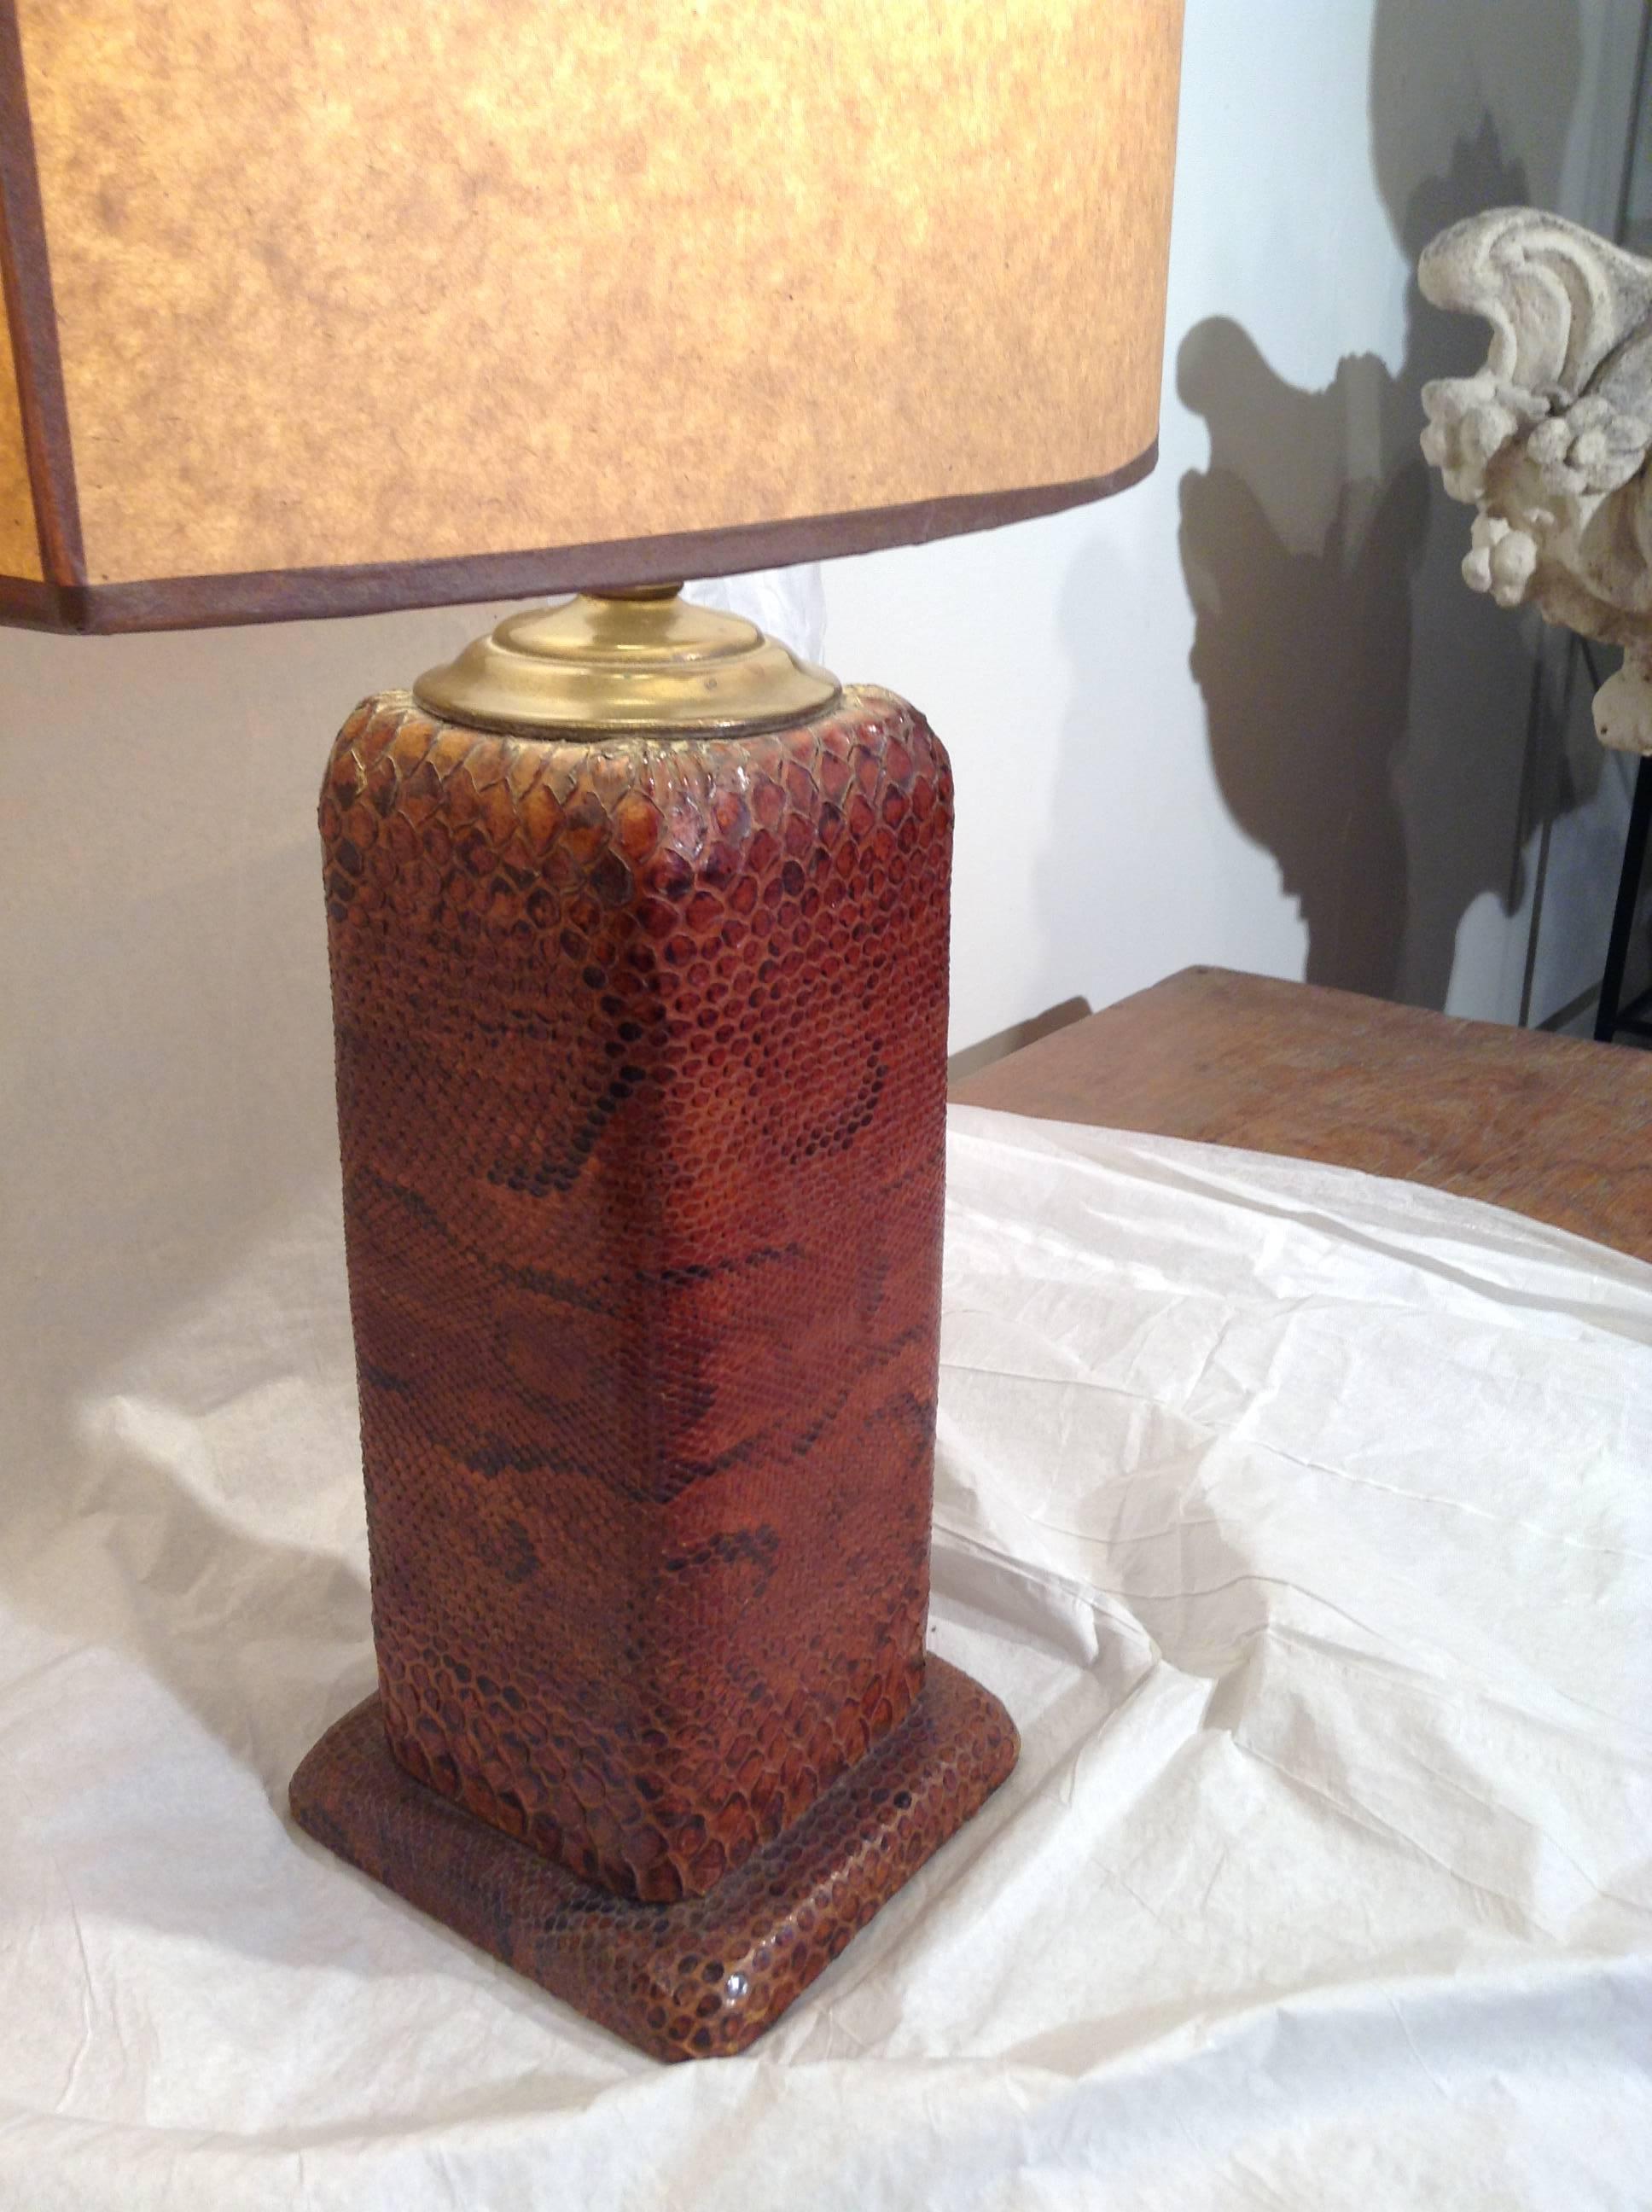 Early 20th century python skin lamps hand stretched snake skin on solid bases. Handmade parchment lampshades.